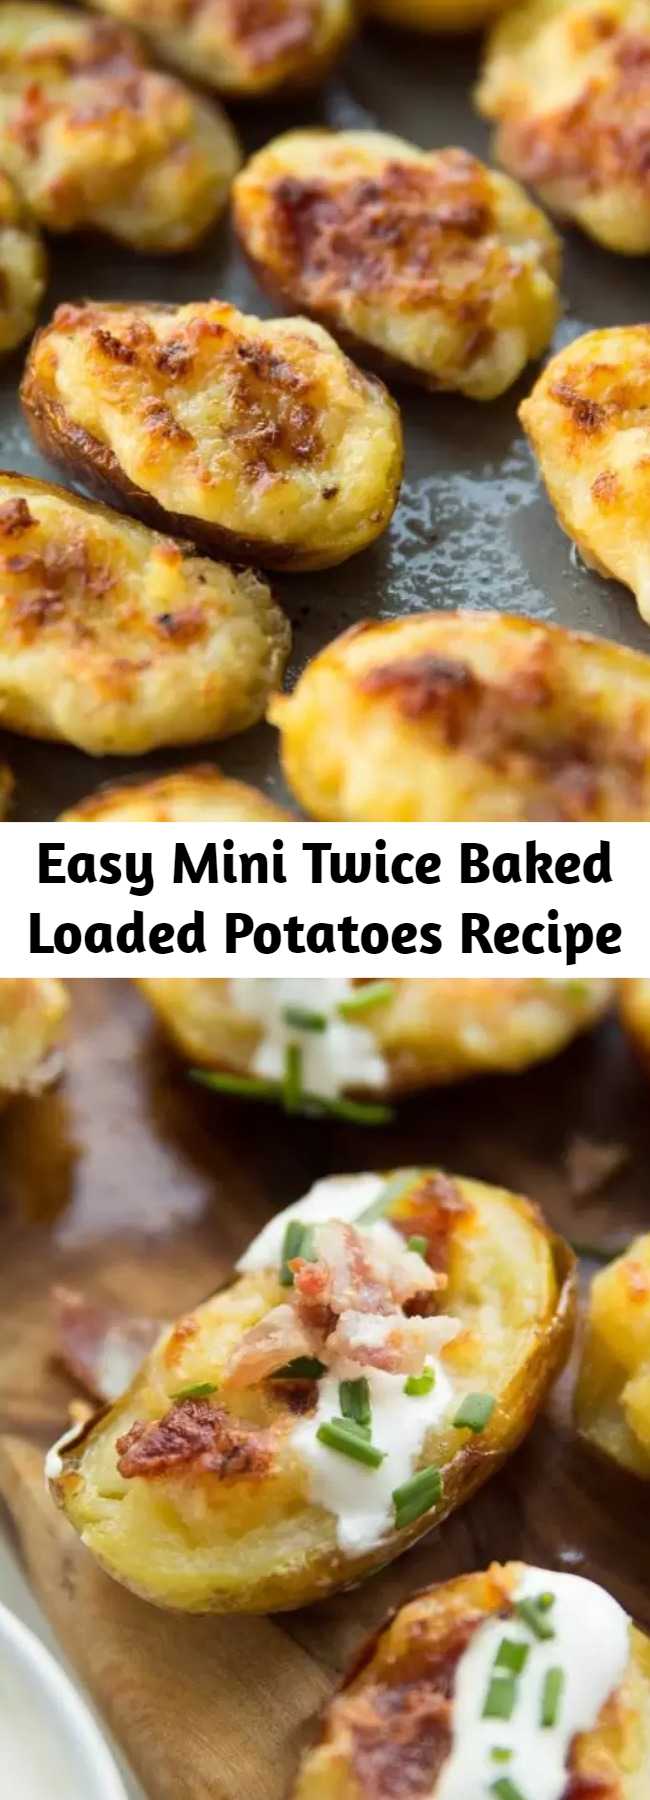 Easy Mini Twice Baked Loaded Potatoes Recipe - These Mini Twice Baked Potatoes are loaded with bacon and served with sour cream and fresh chives. Say hello to your new favourite finger food! #cheese #bacon #potato #loadedpotatoes